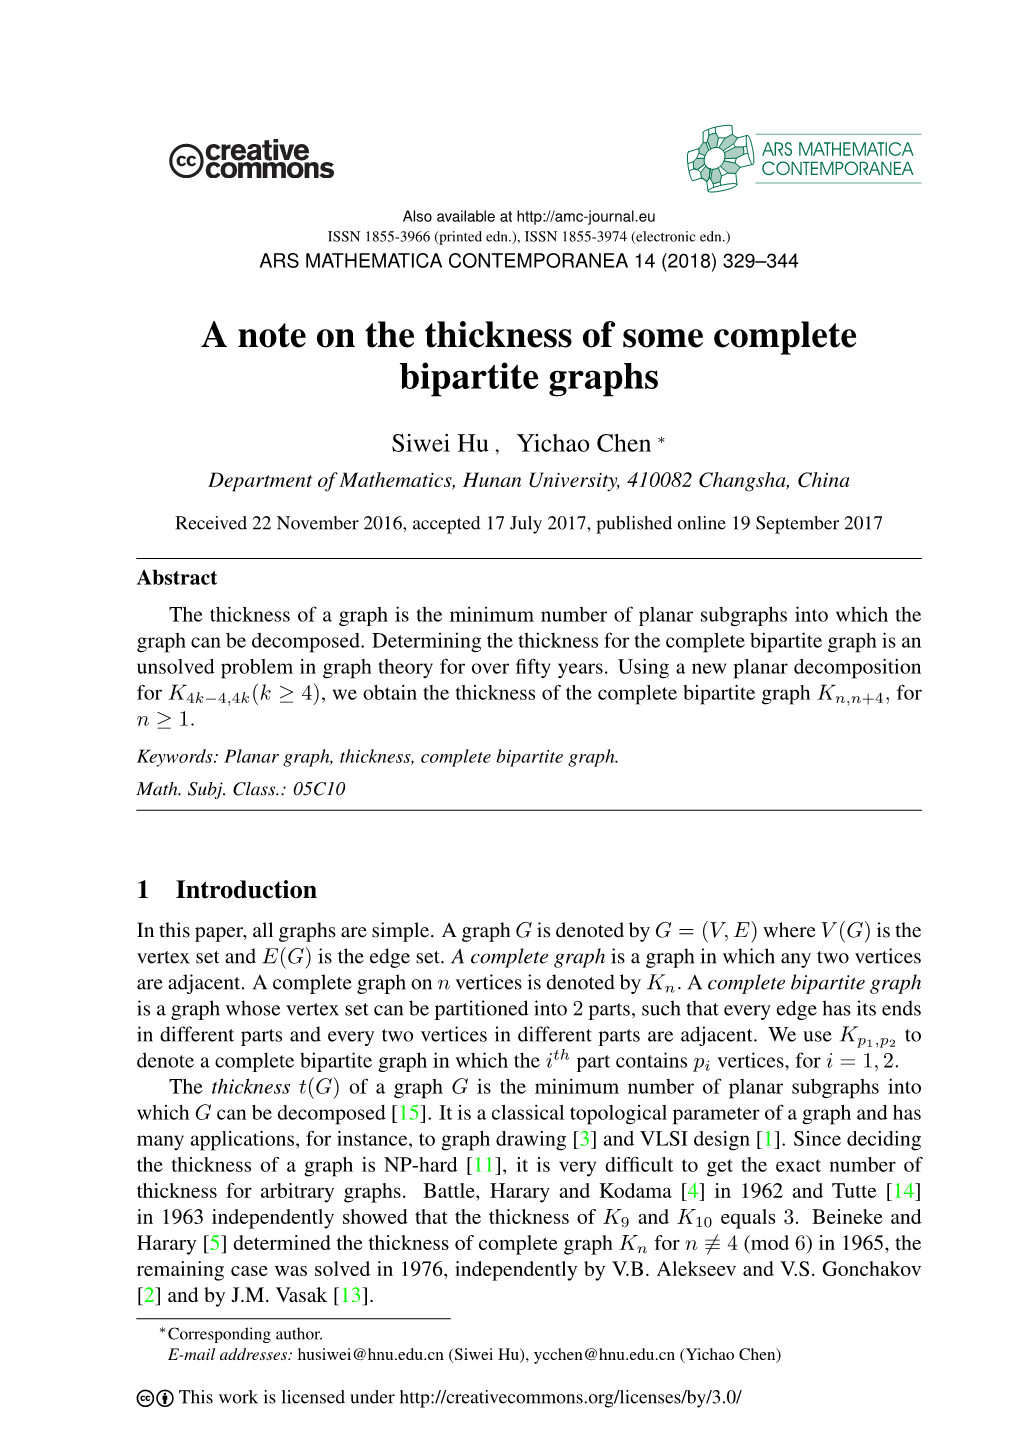 A Note on the Thickness of Some Complete Bipartite Graphs